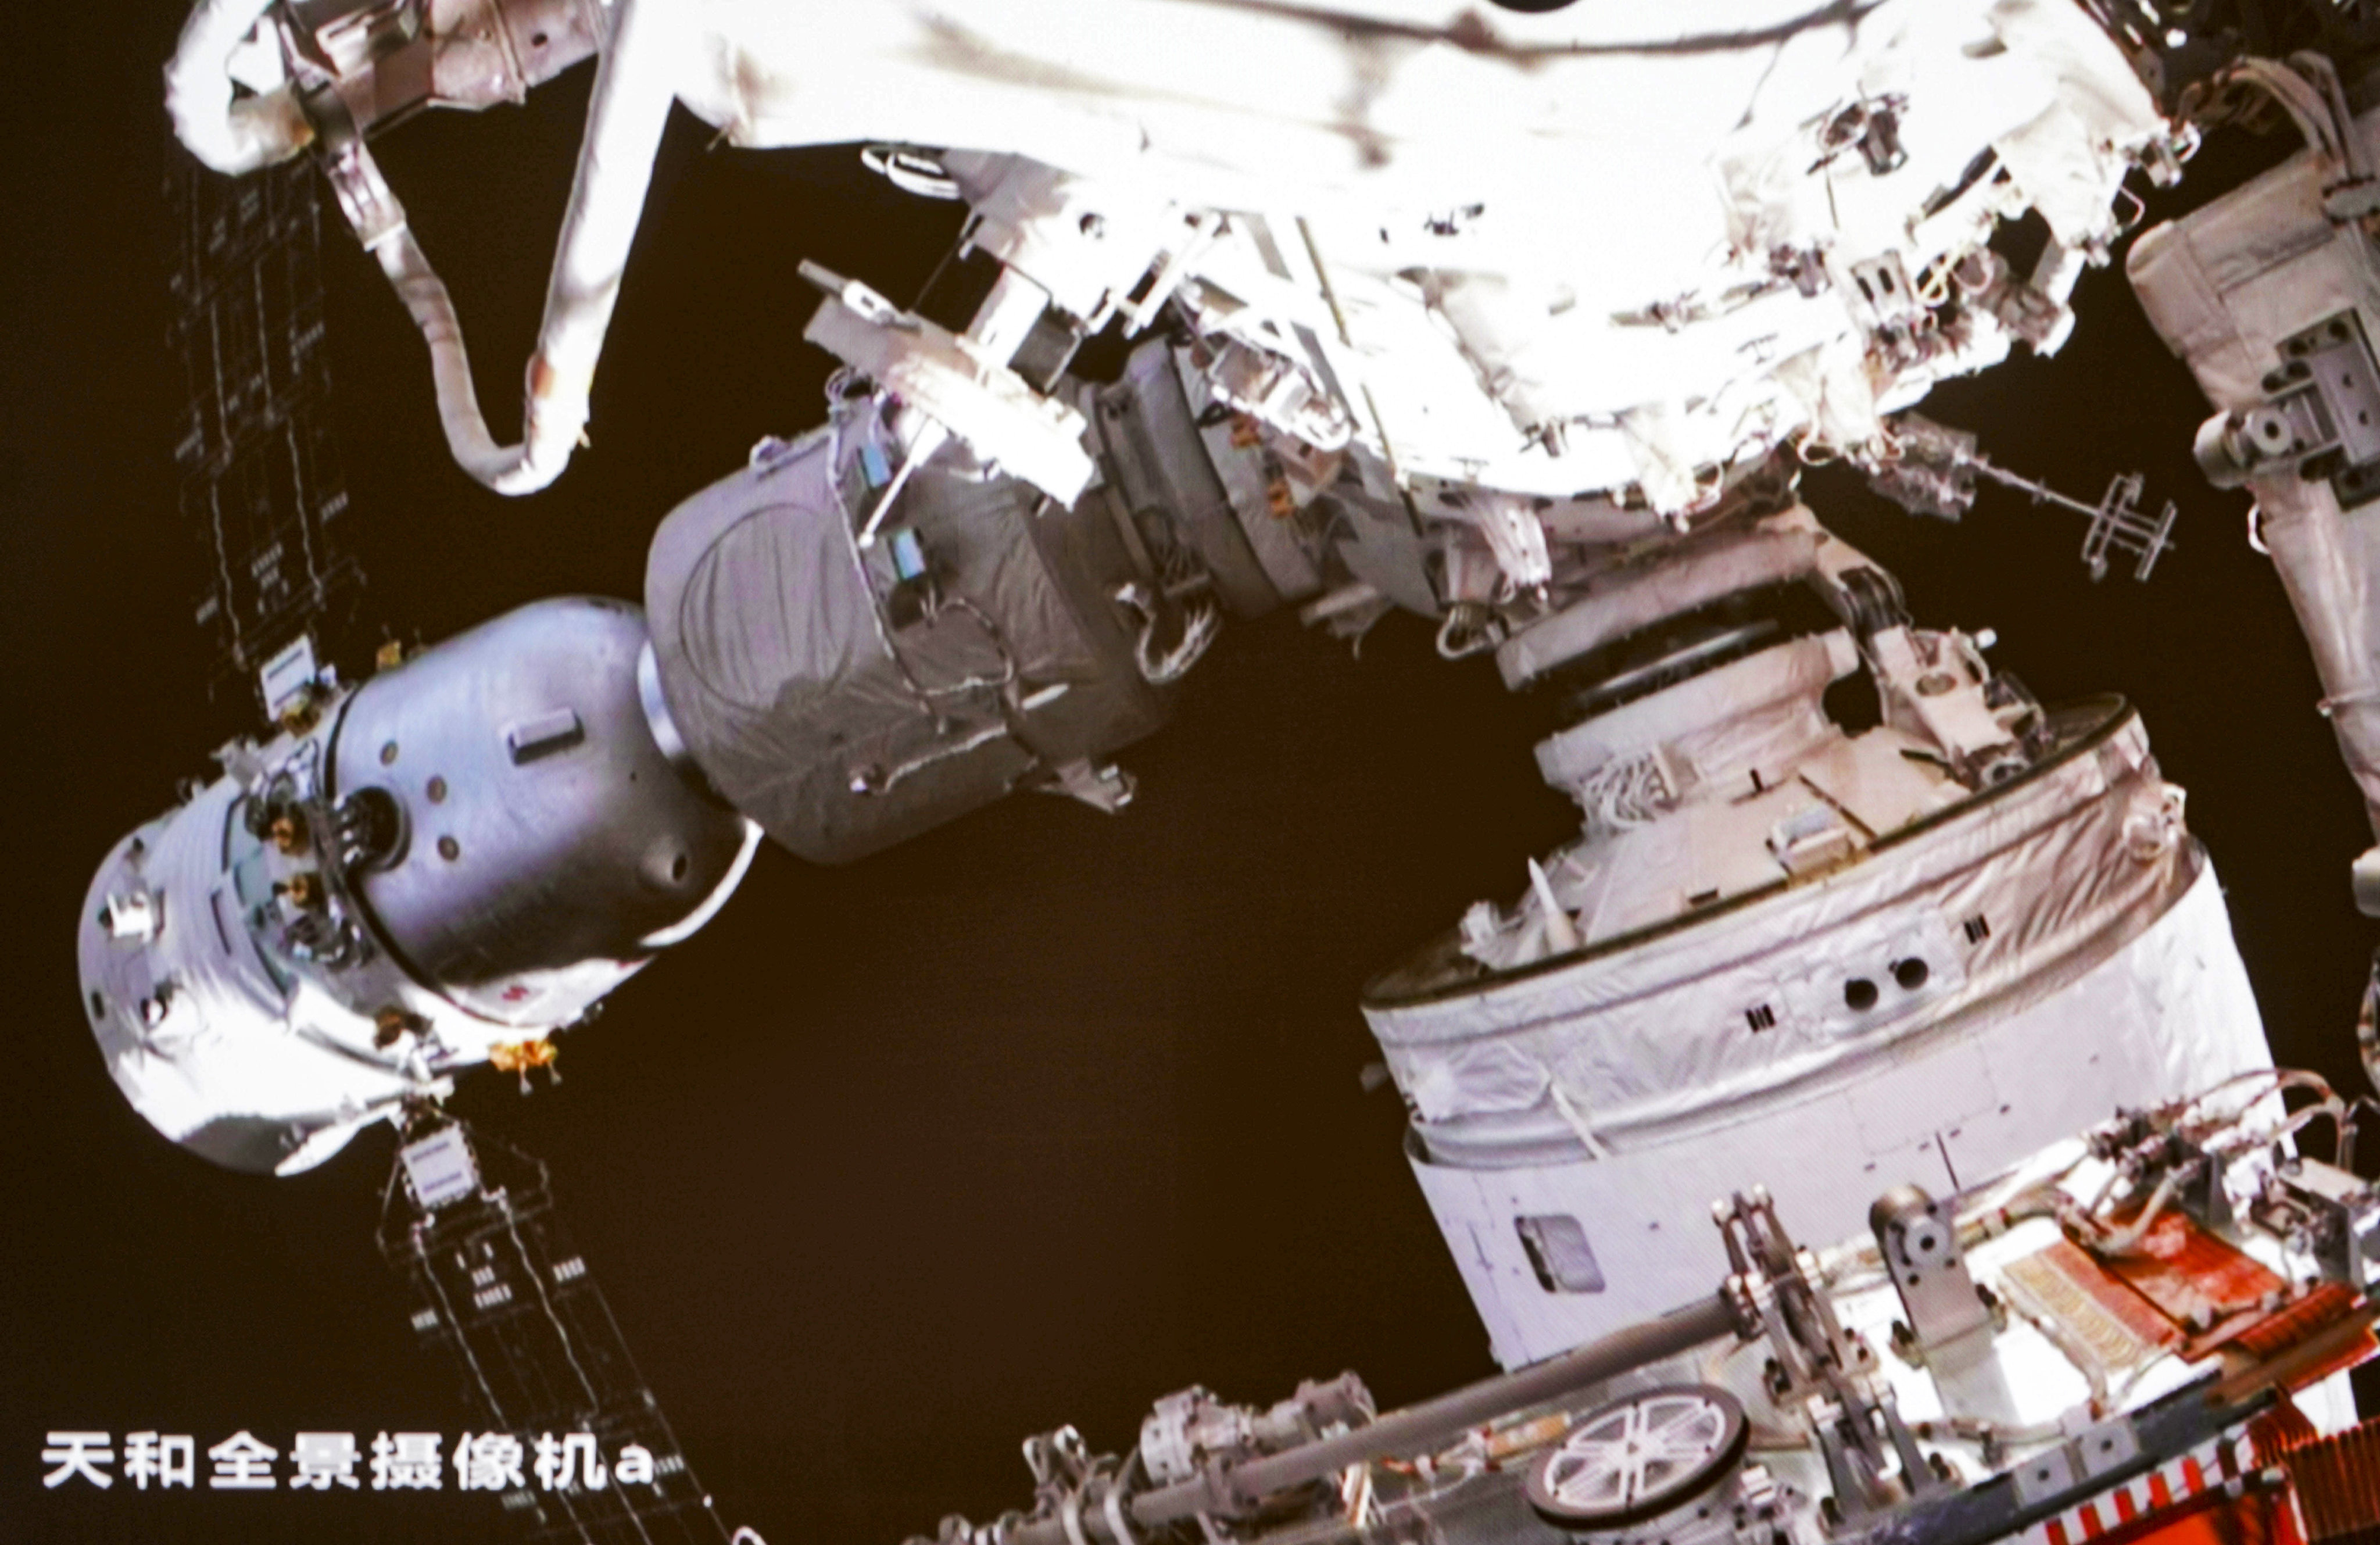 The Wentian lab module was successfully moved from the front to the side of the space station. Photo: Handout